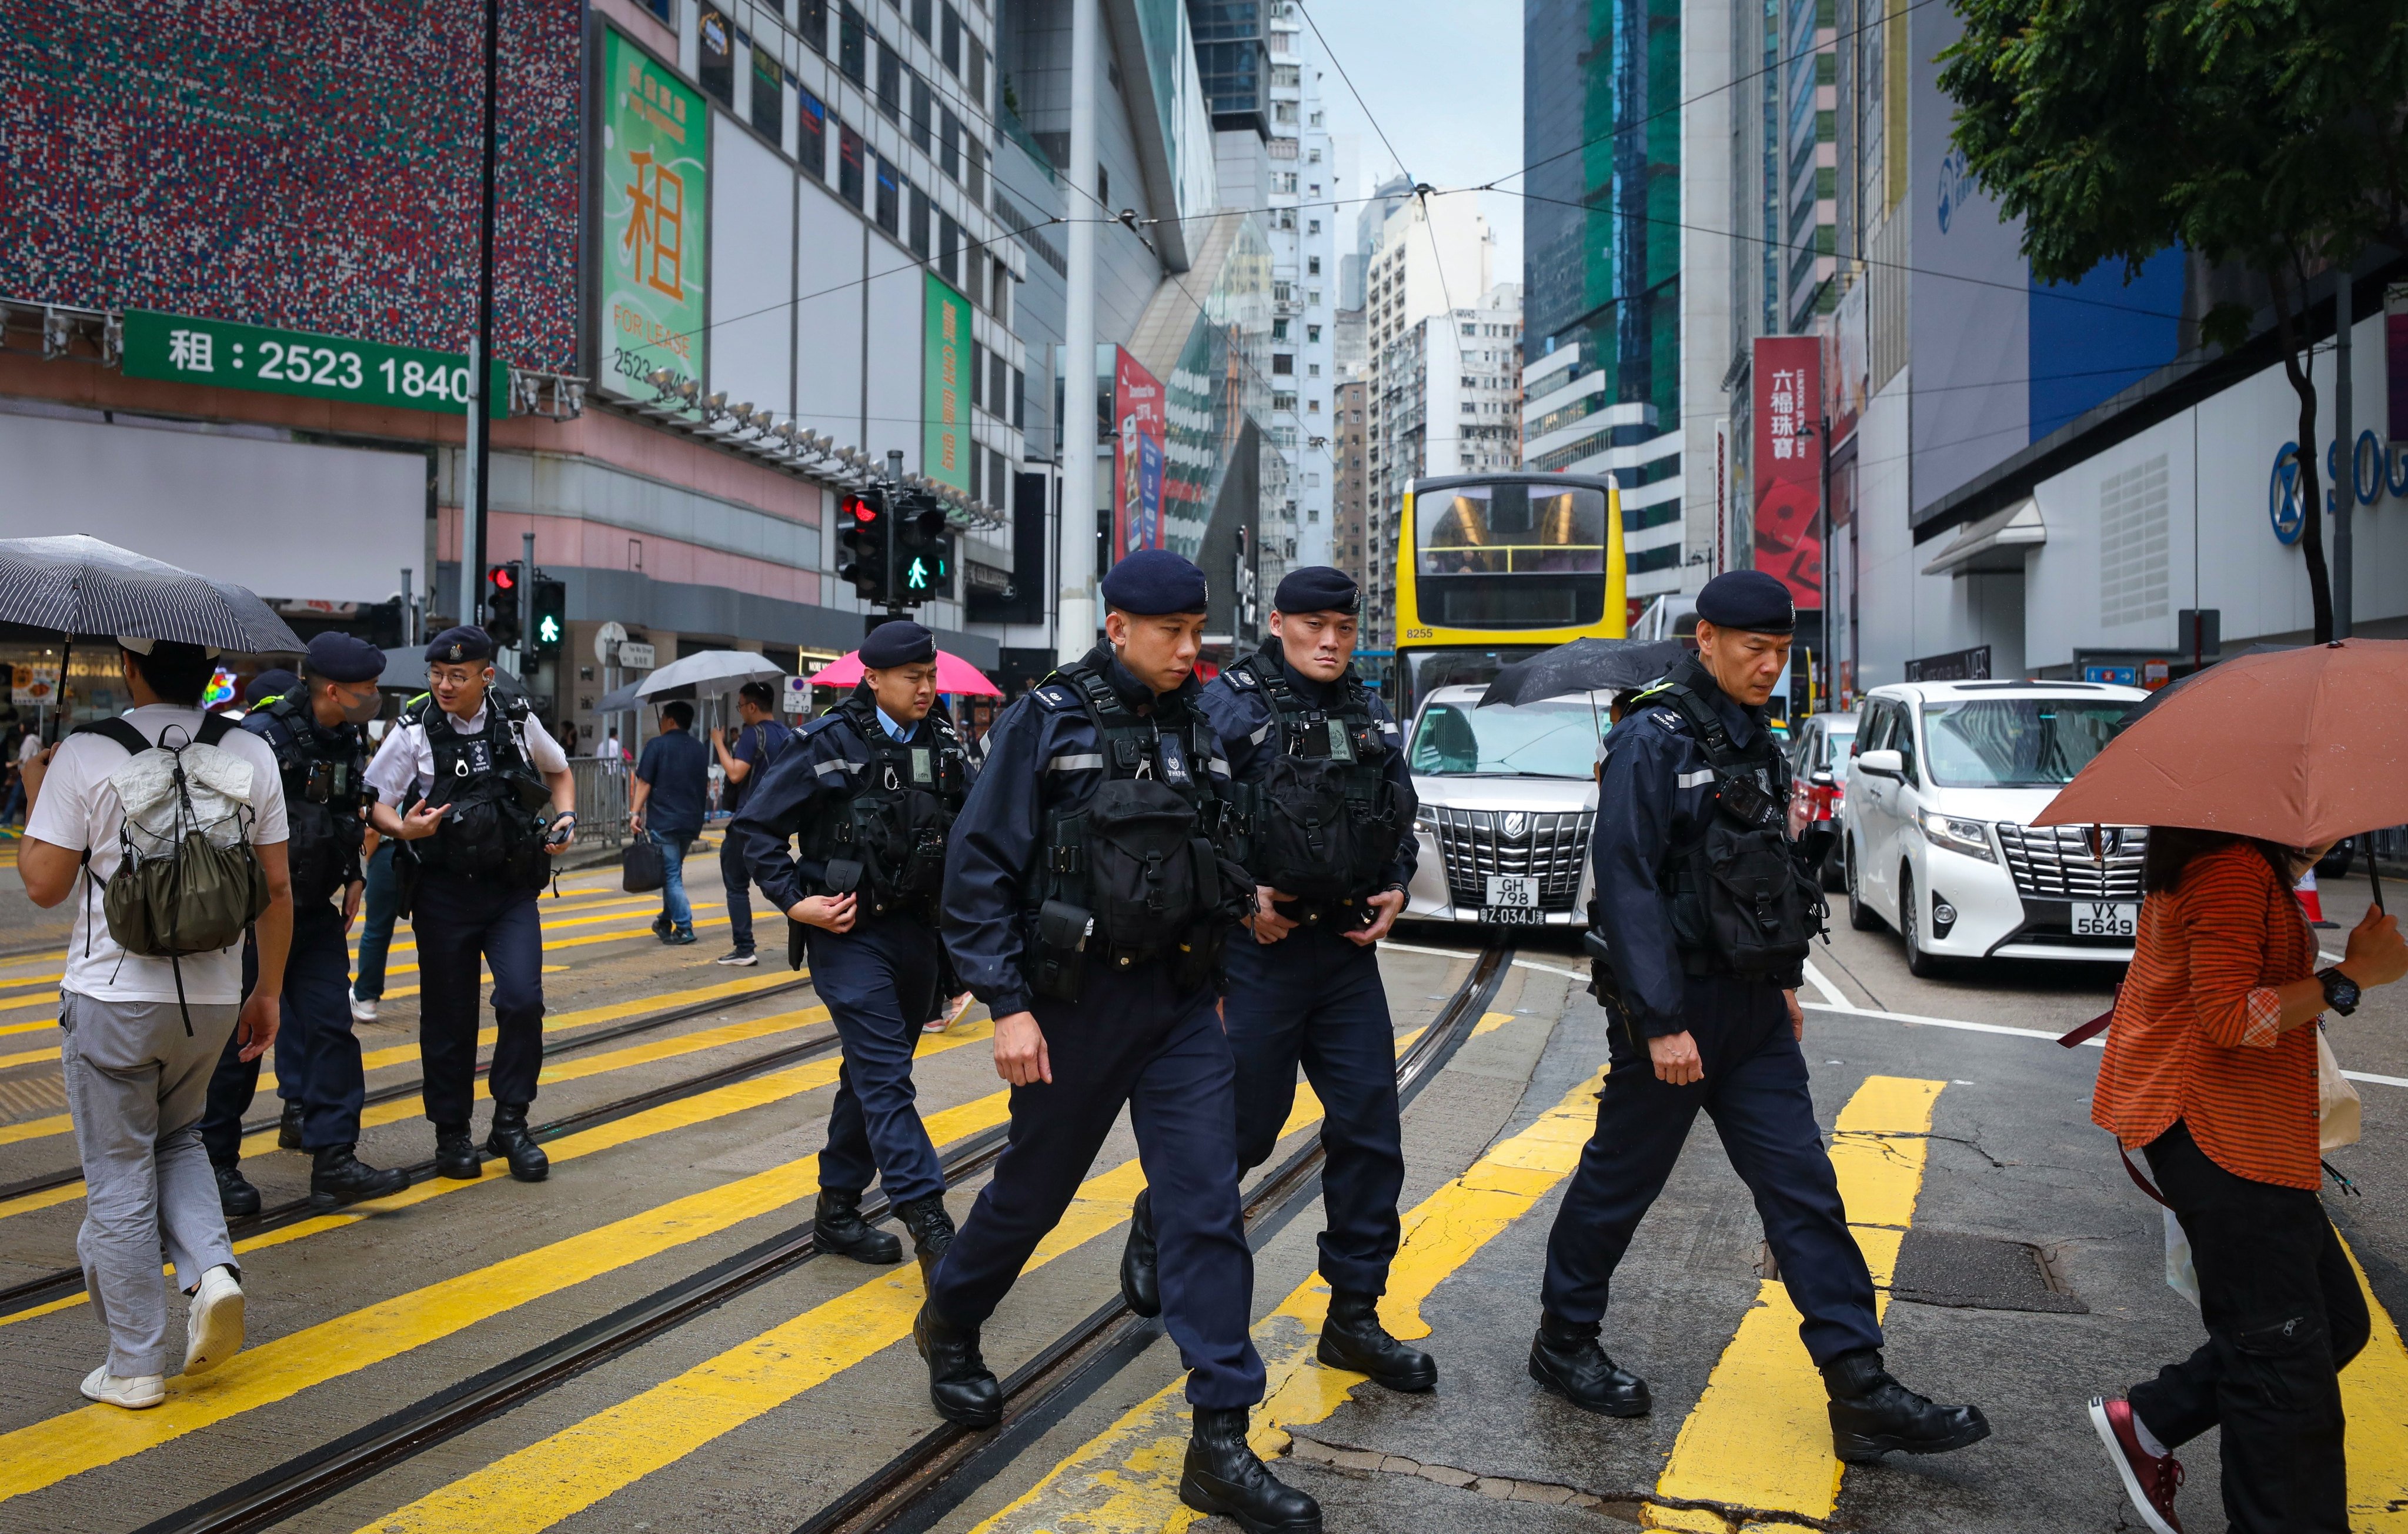 Several Taiwanese tourists have recounted their experiences of being randomly stopped or searched by Hong Kong police in the city. Photo: Xiaomei Chen